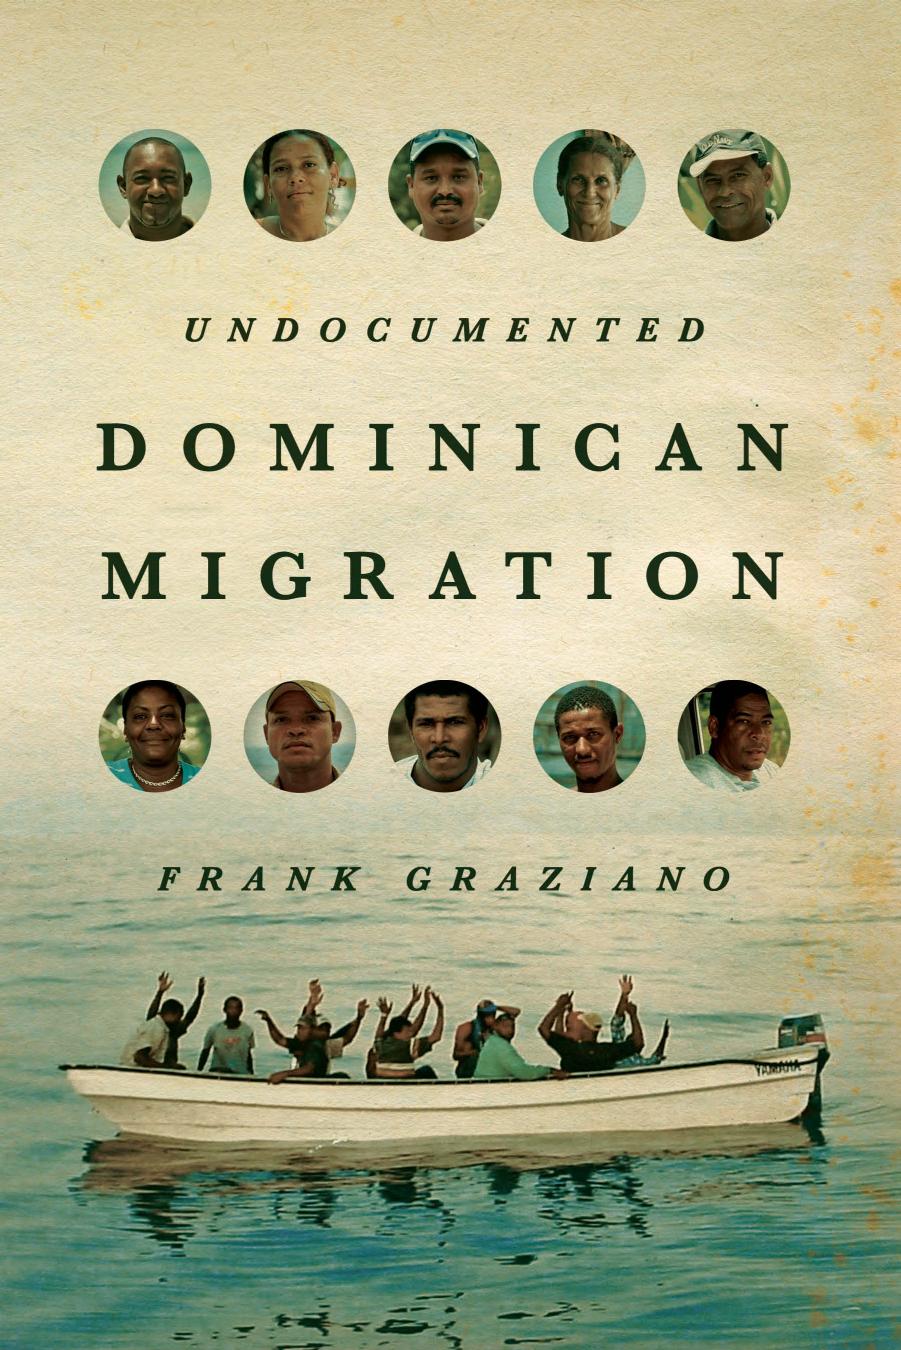 Undocumented Dominican Migration by Frank Graziano